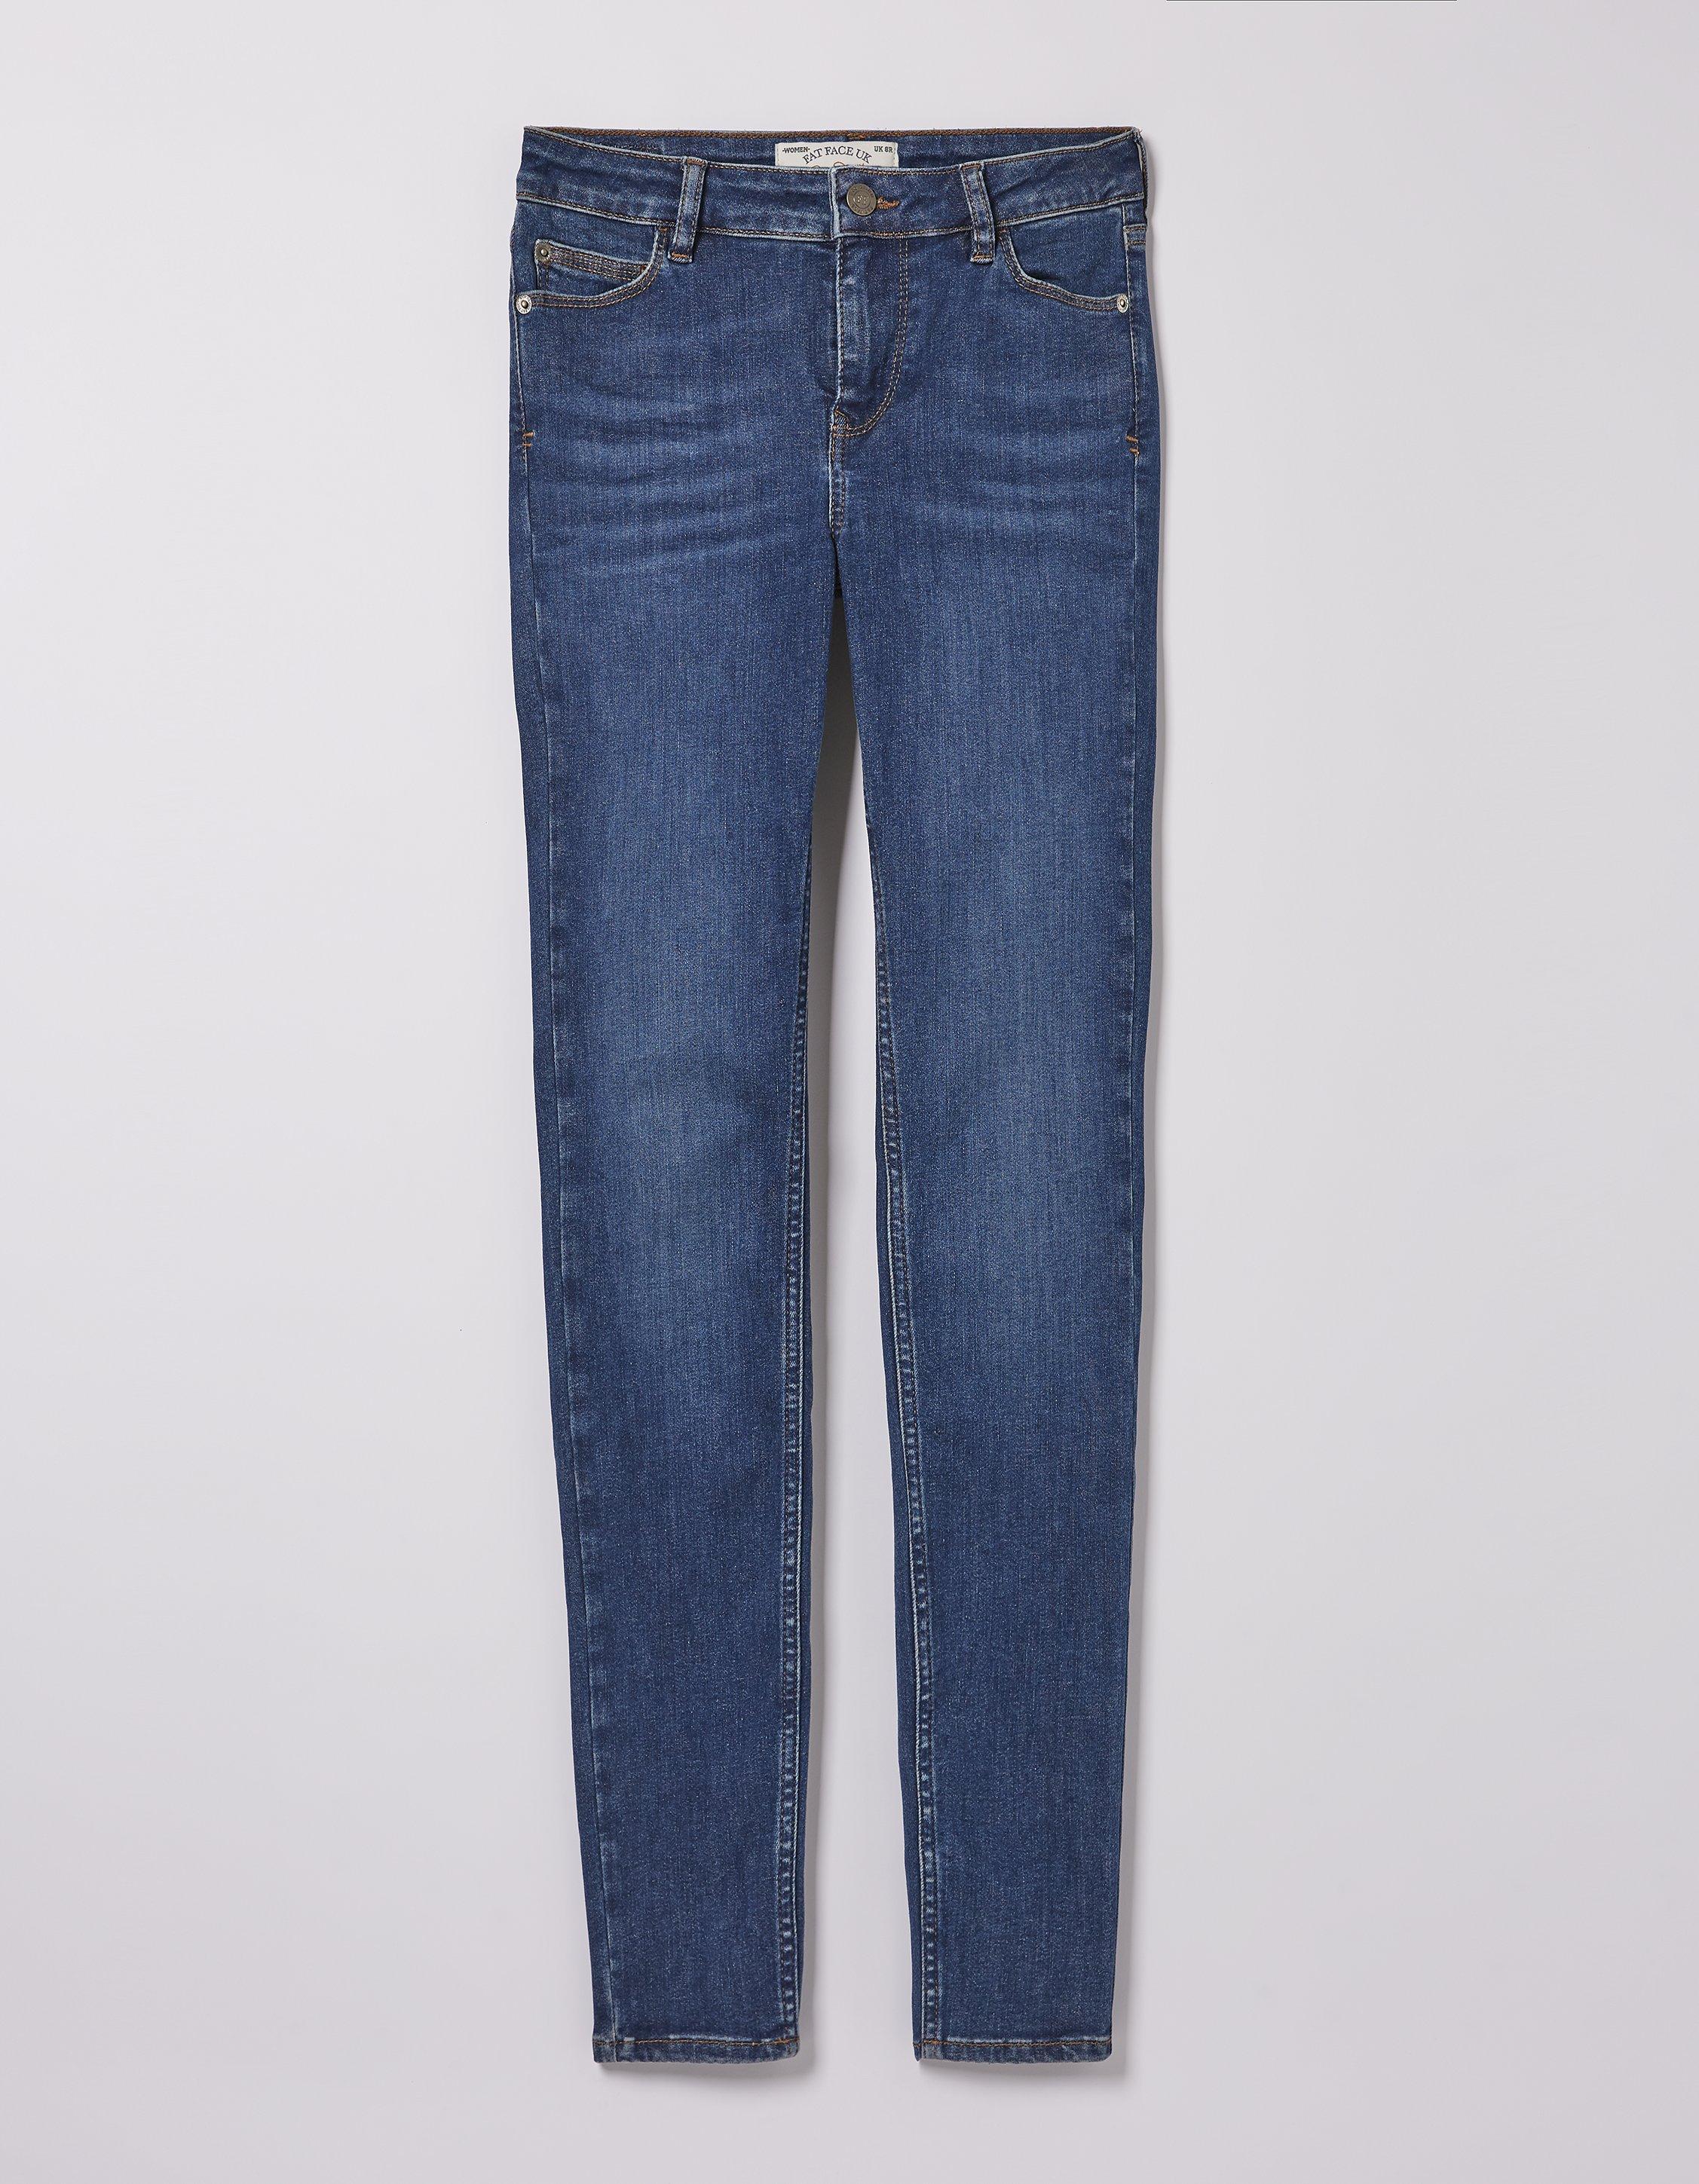 Harlow High Waist Super Skinny Jeans, Jeans & Dungarees